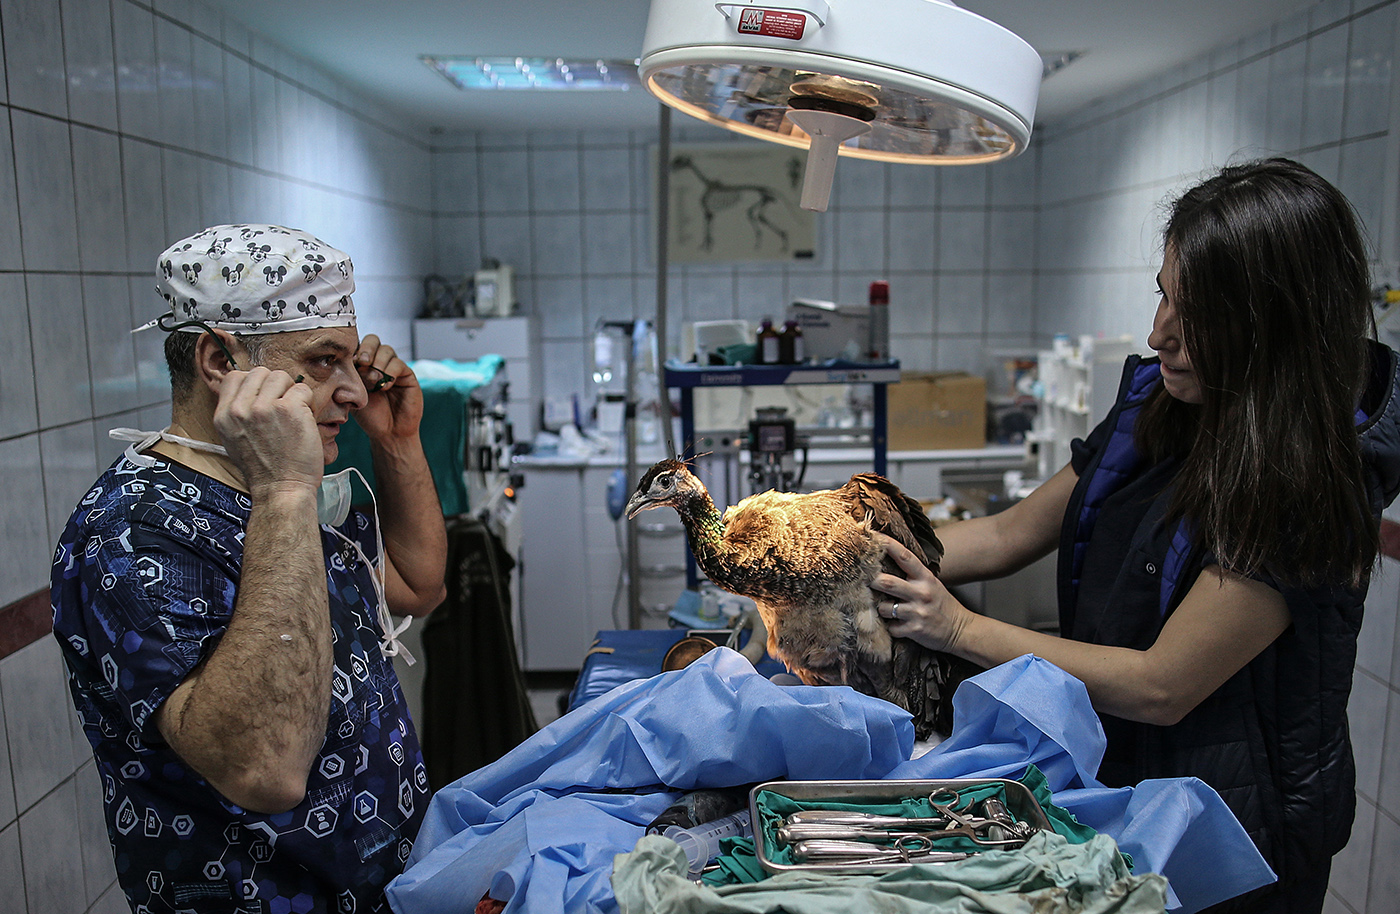 Head of Department of Wild Animal Diseases and Ecology Prof. Dr. Serhat Ozsoy (L) treats a peacock at the Istanbul University Cerrahpasa Faculty of Veterinary Science Hospital in Istanbul, Turkey, 17 December 2018.